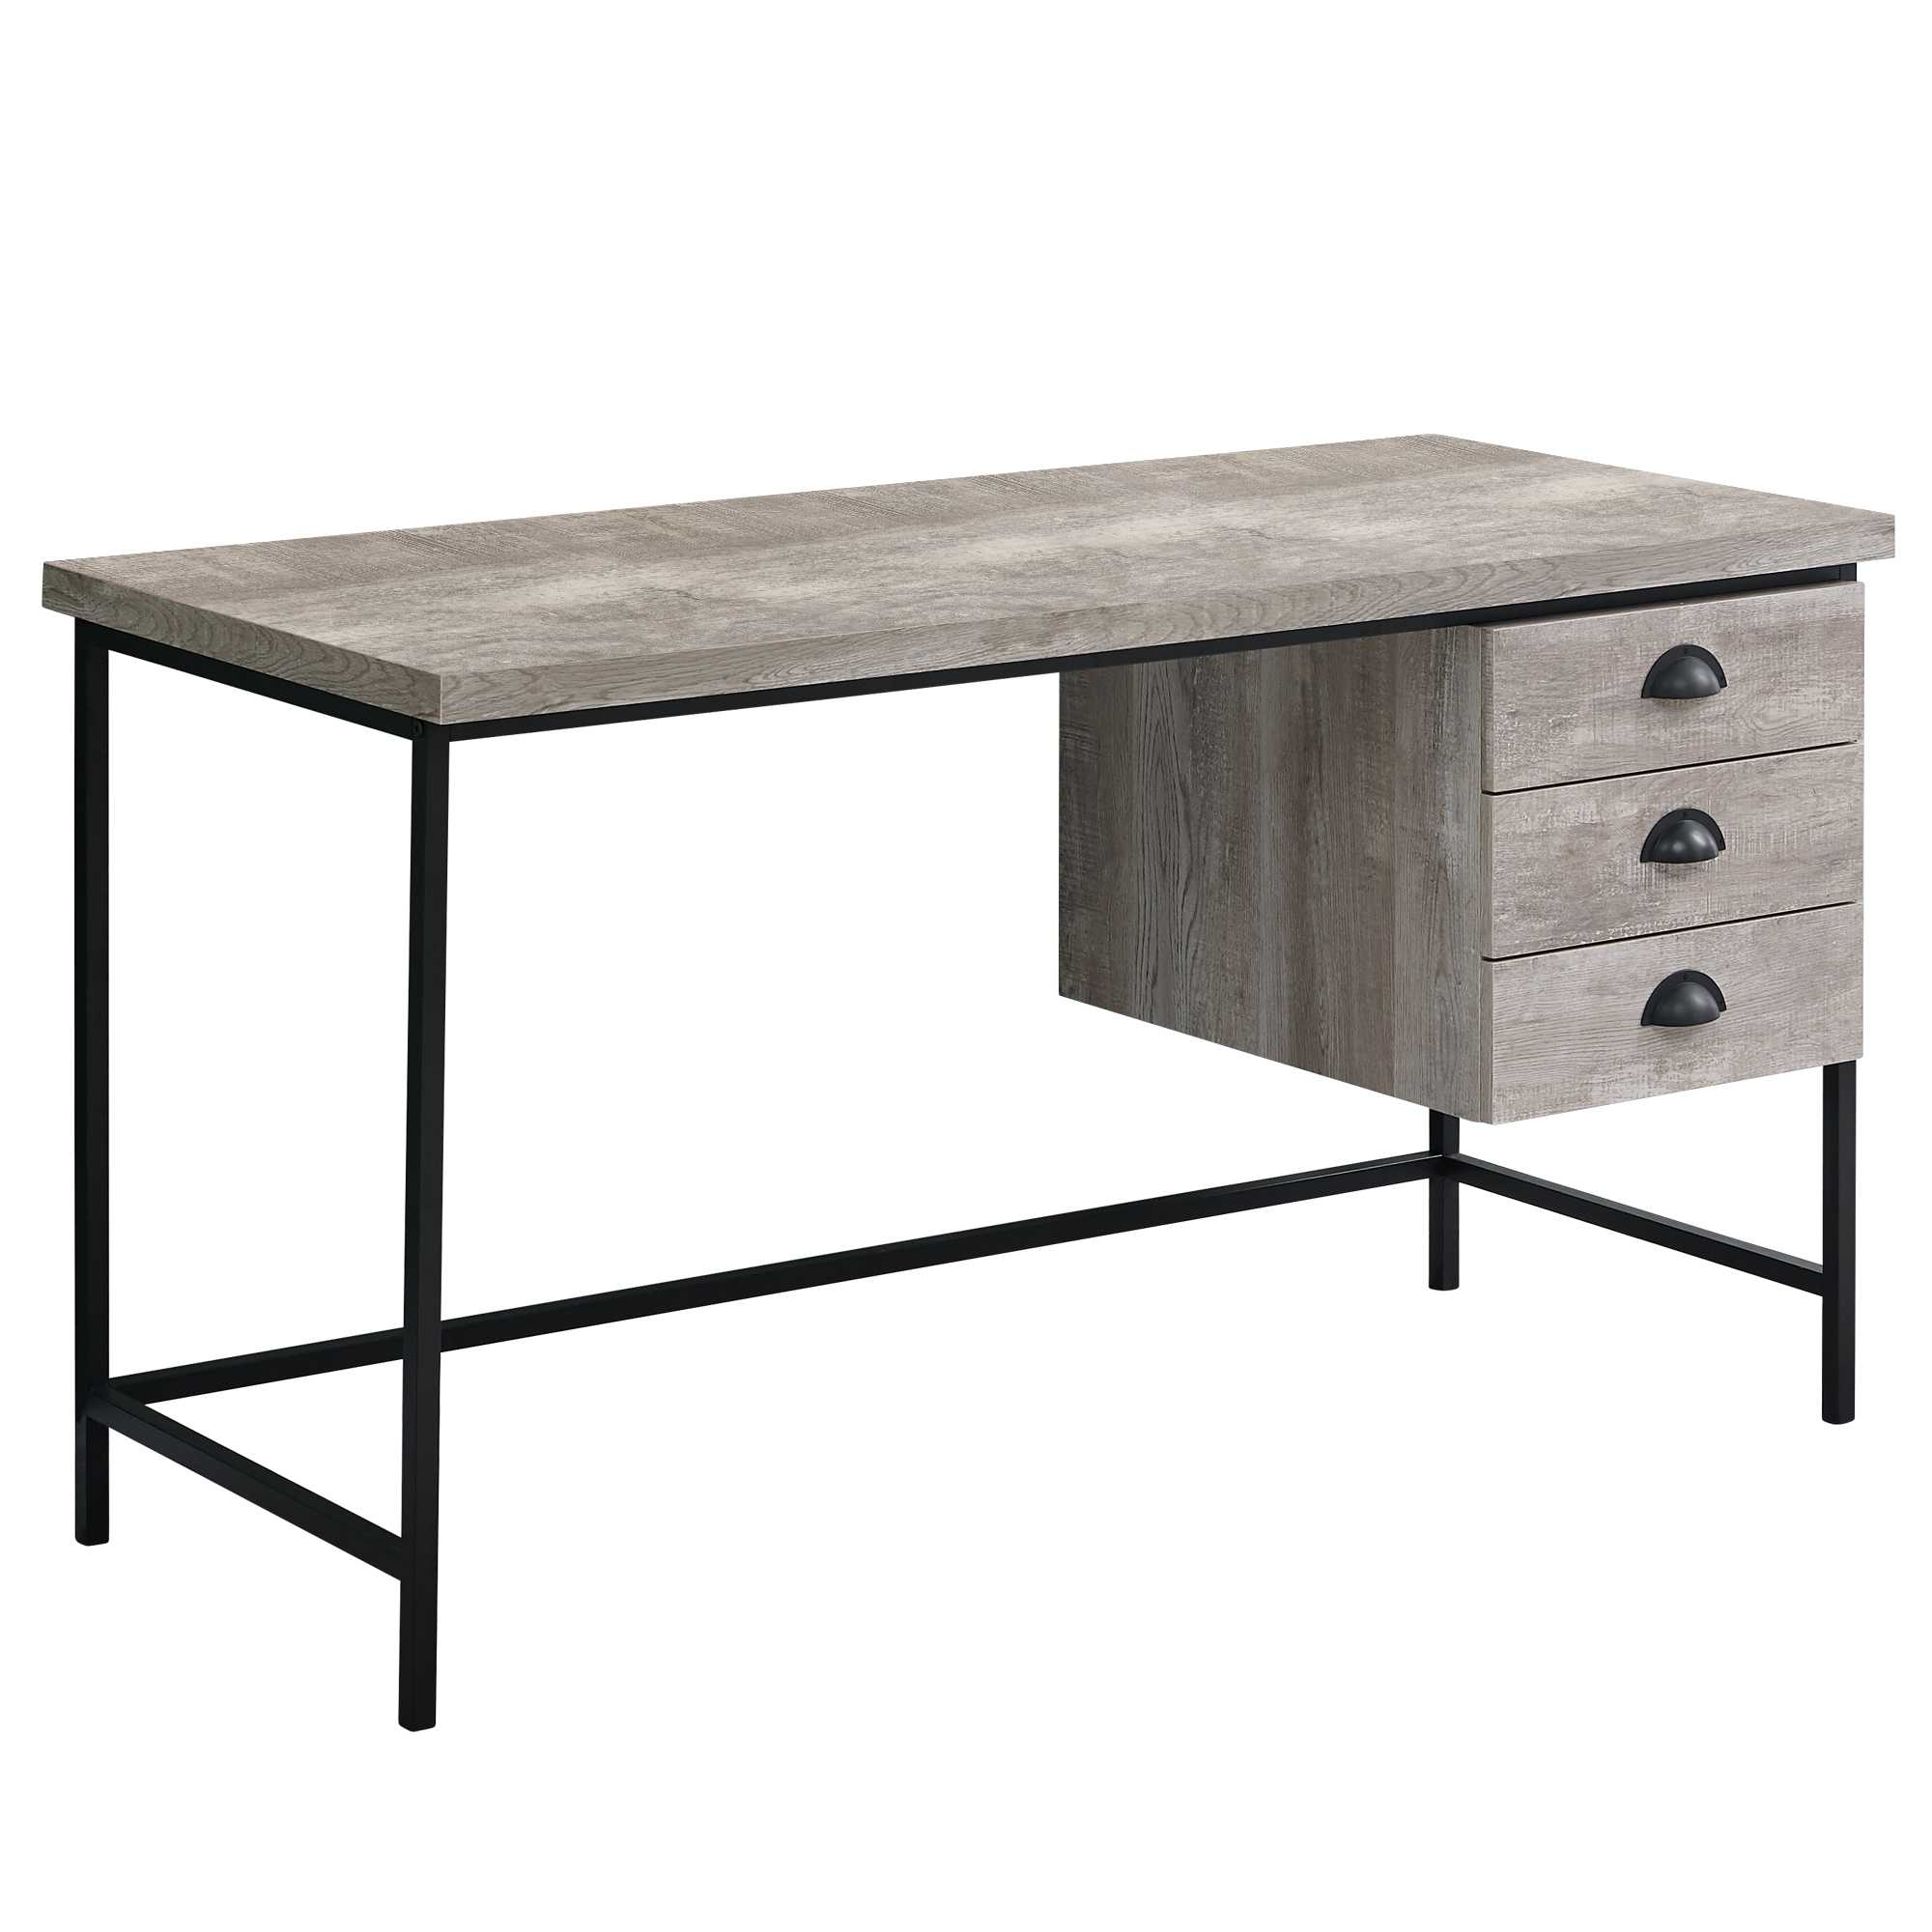 23.75" x 55.25" x 30" Taupe Black Particle Board Hollow Core Metal Computer Desk